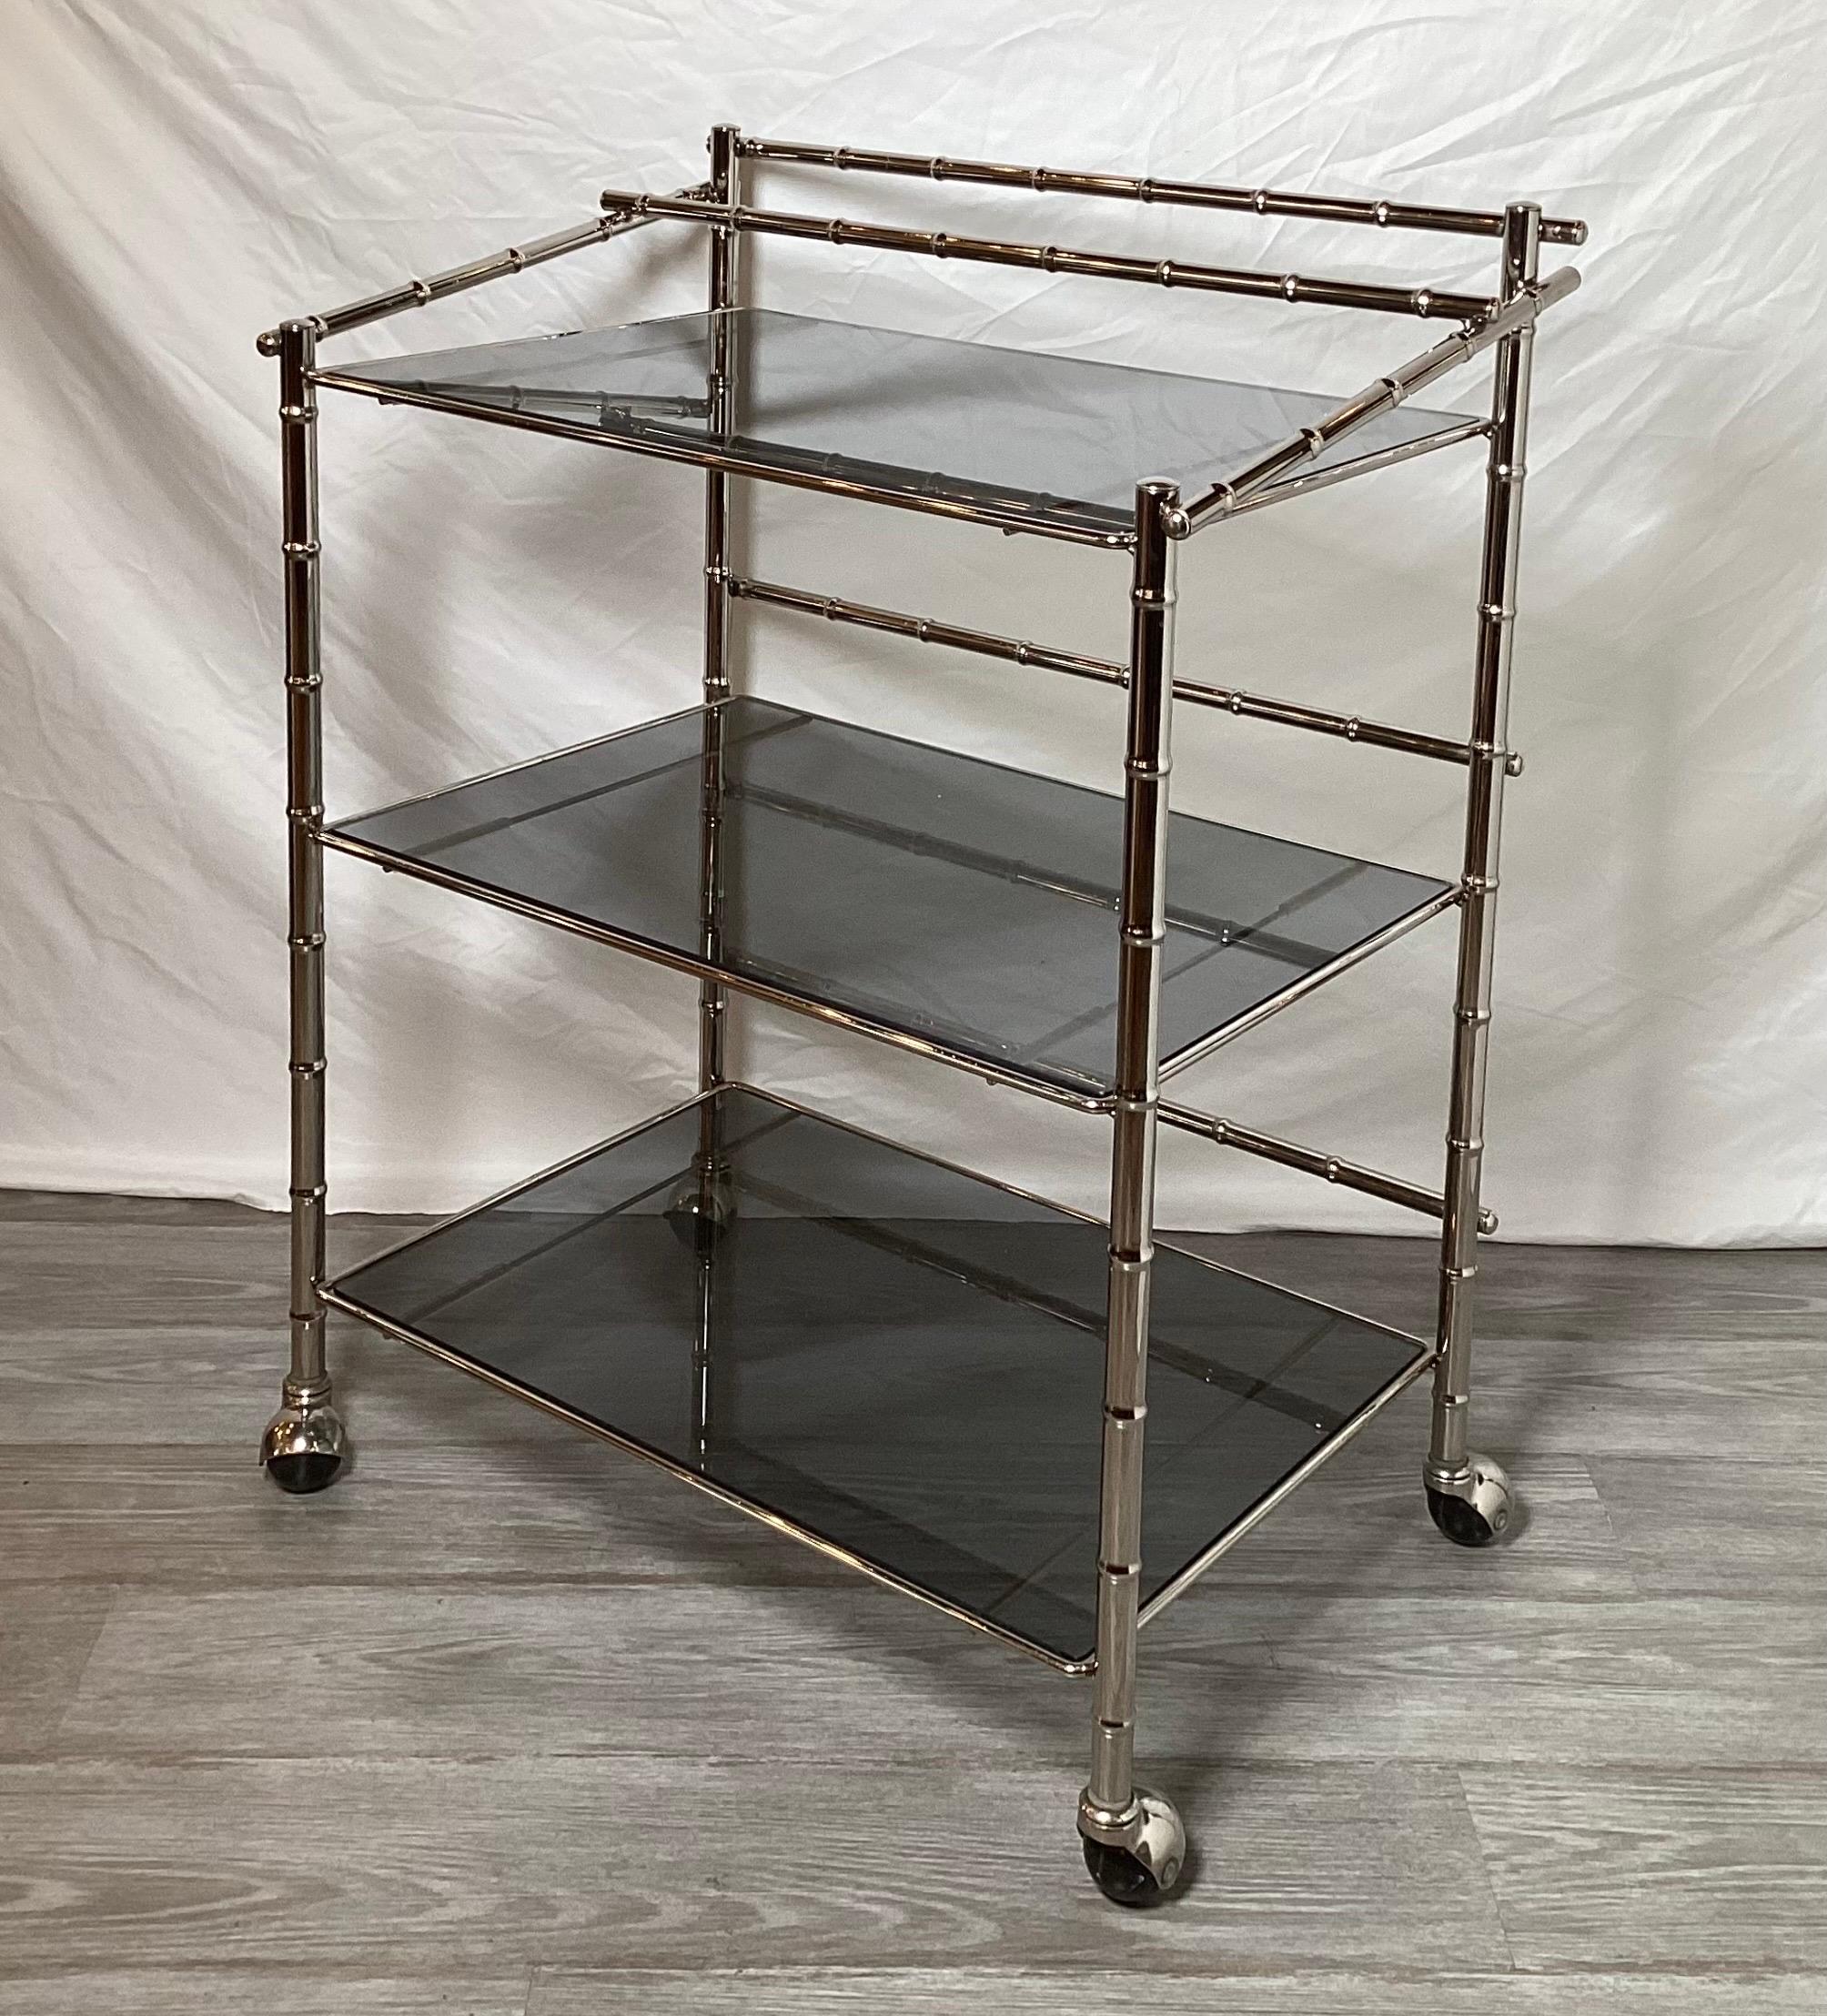 Very nice midcentury Faux bamboo chrome bar cart with smoked glass shelves.
Three tiered shelves with a bottle rack on the top shelf. The cart is in very good original condition.